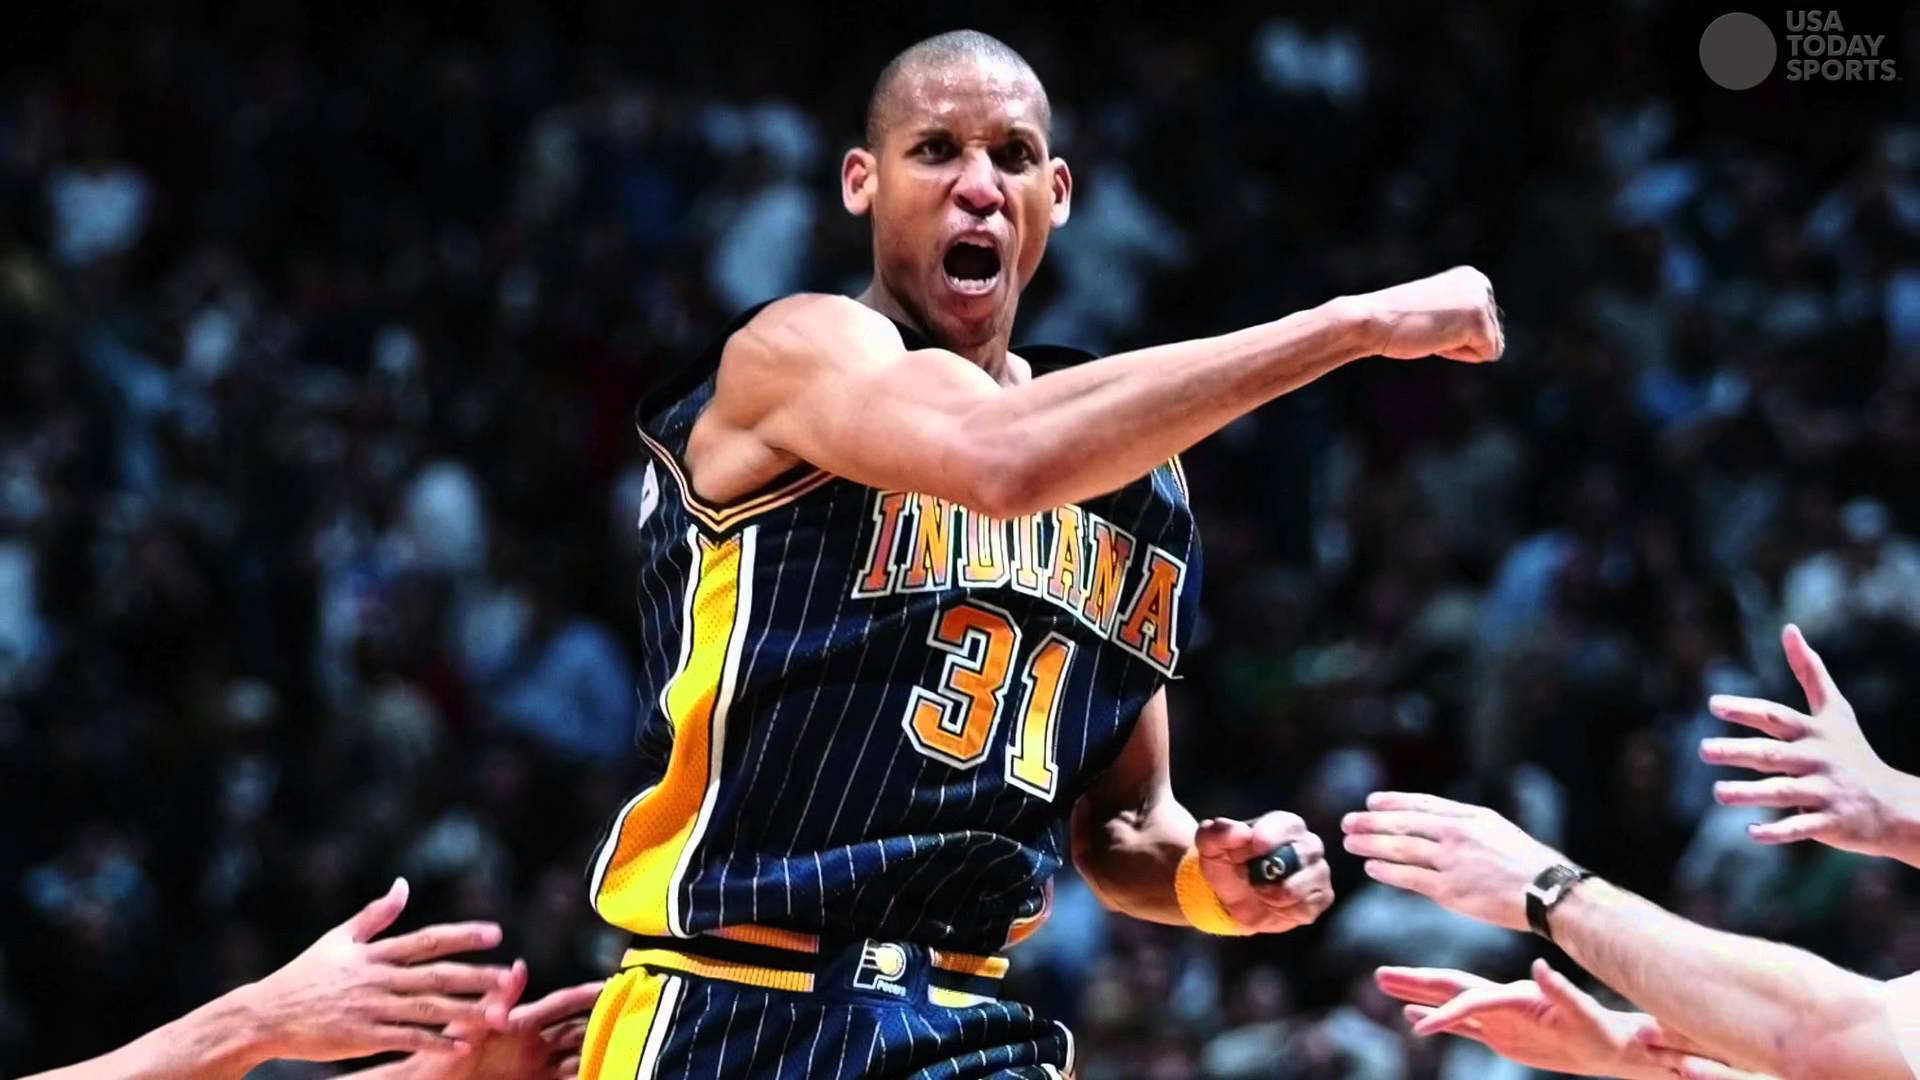 Who's better: Stephen Curry or Reggie Miller?